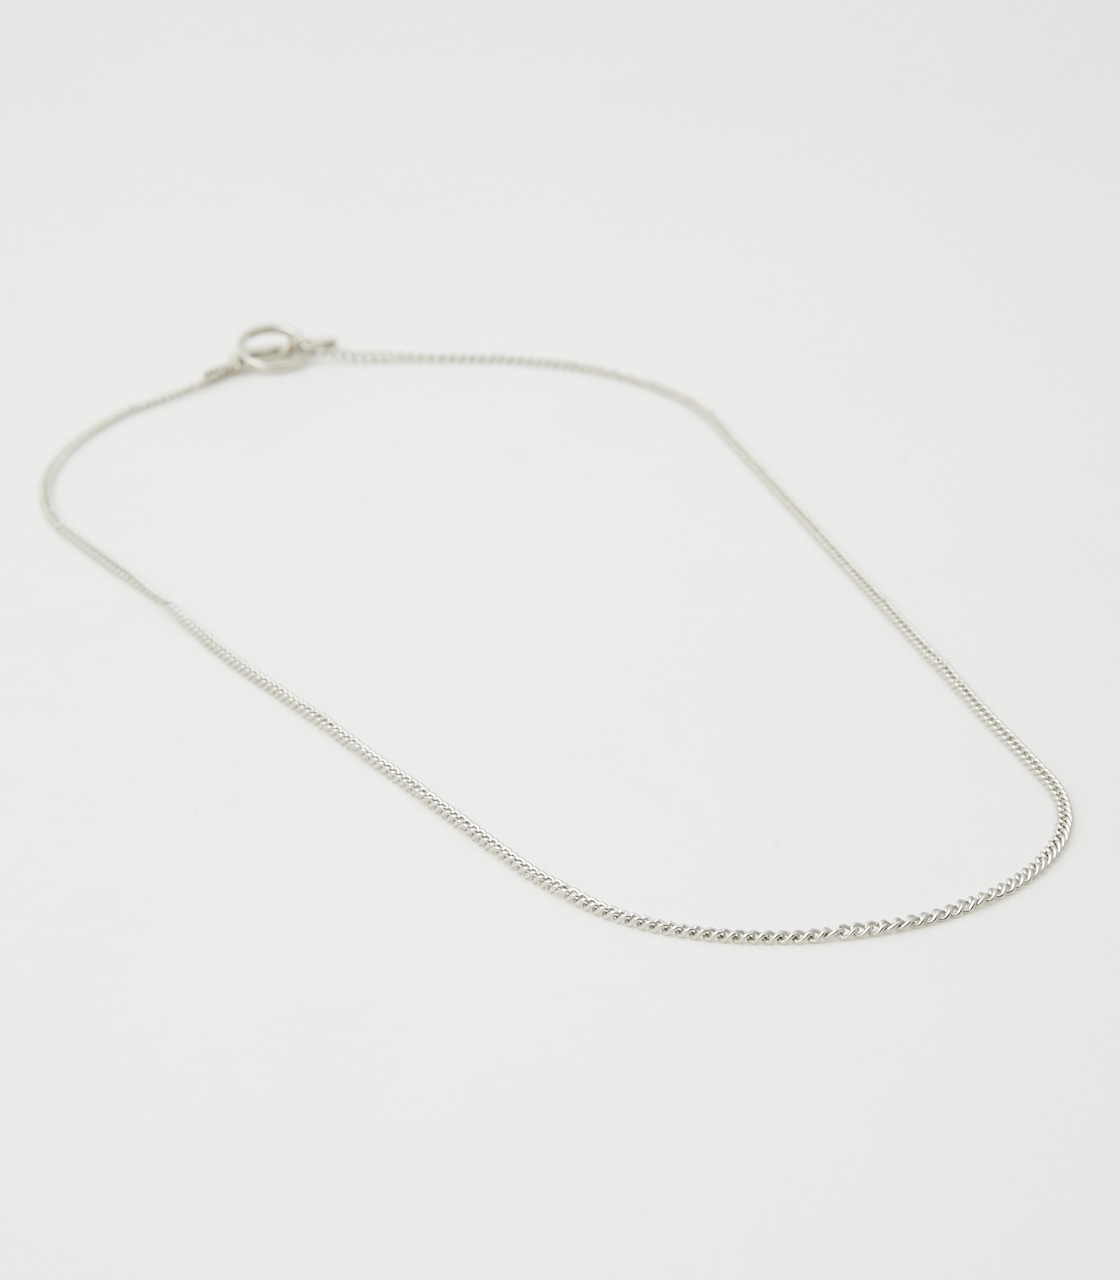 SIMPLE CHAIN NECKLACE/シンプルチェーンネックレス 詳細画像 Multi_1 2